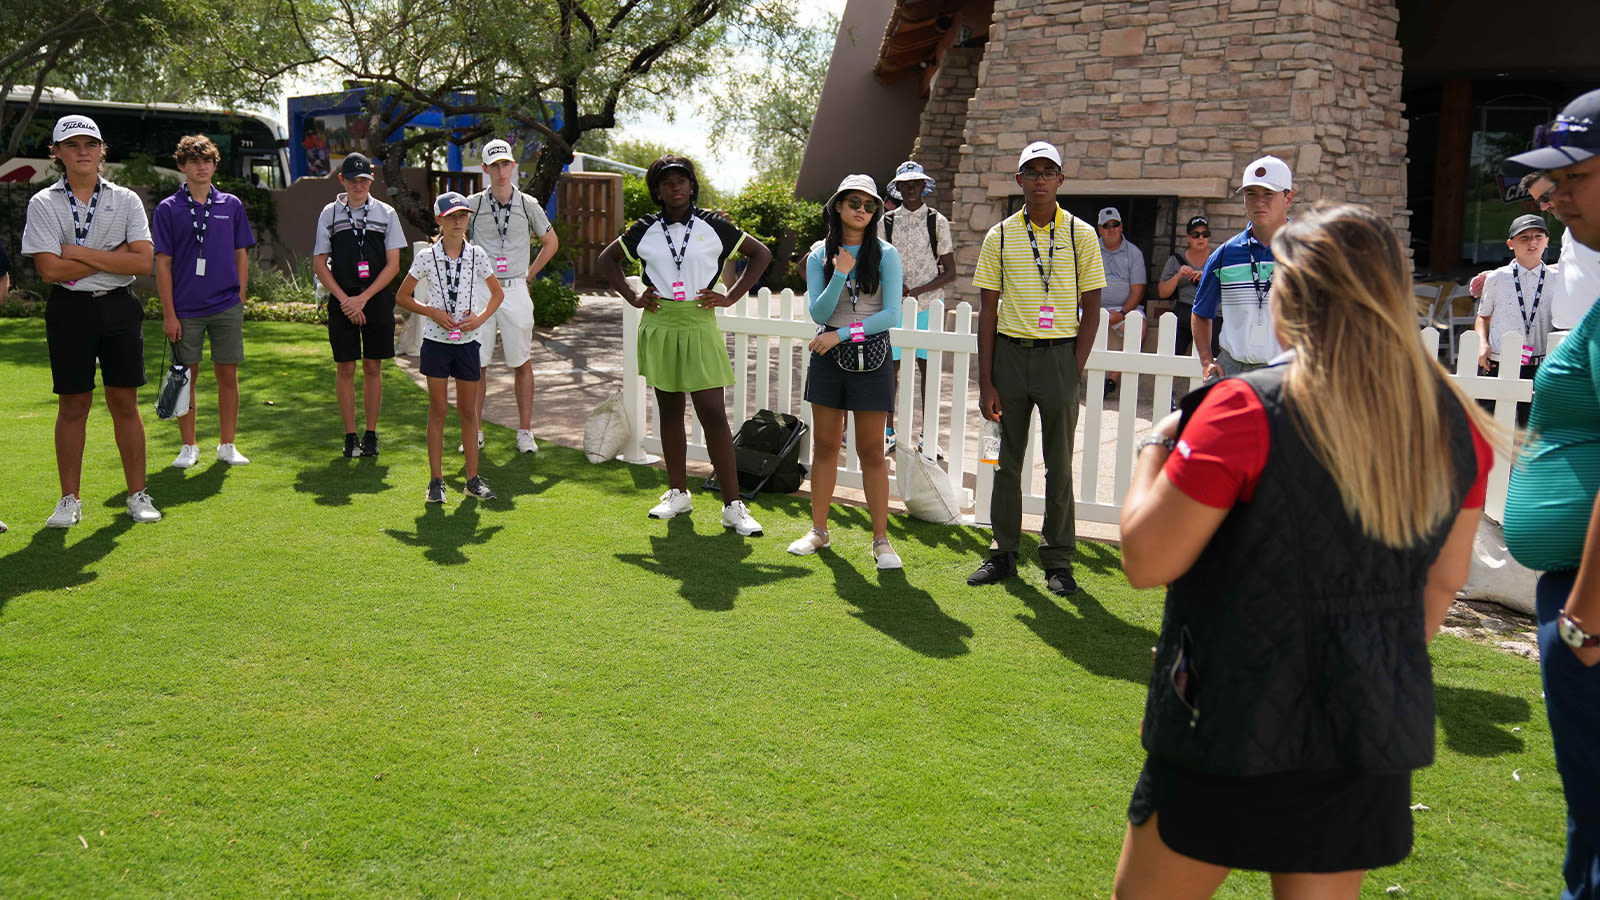 Participants during the Career Exploration Day tour in the second round of the 2022 National Car Rental PGA Jr. League Championship at Grayhawk Golf Club on October 8, 2022 in Scottsdale, Arizona. (Photo by Darren Carroll/PGA of America)